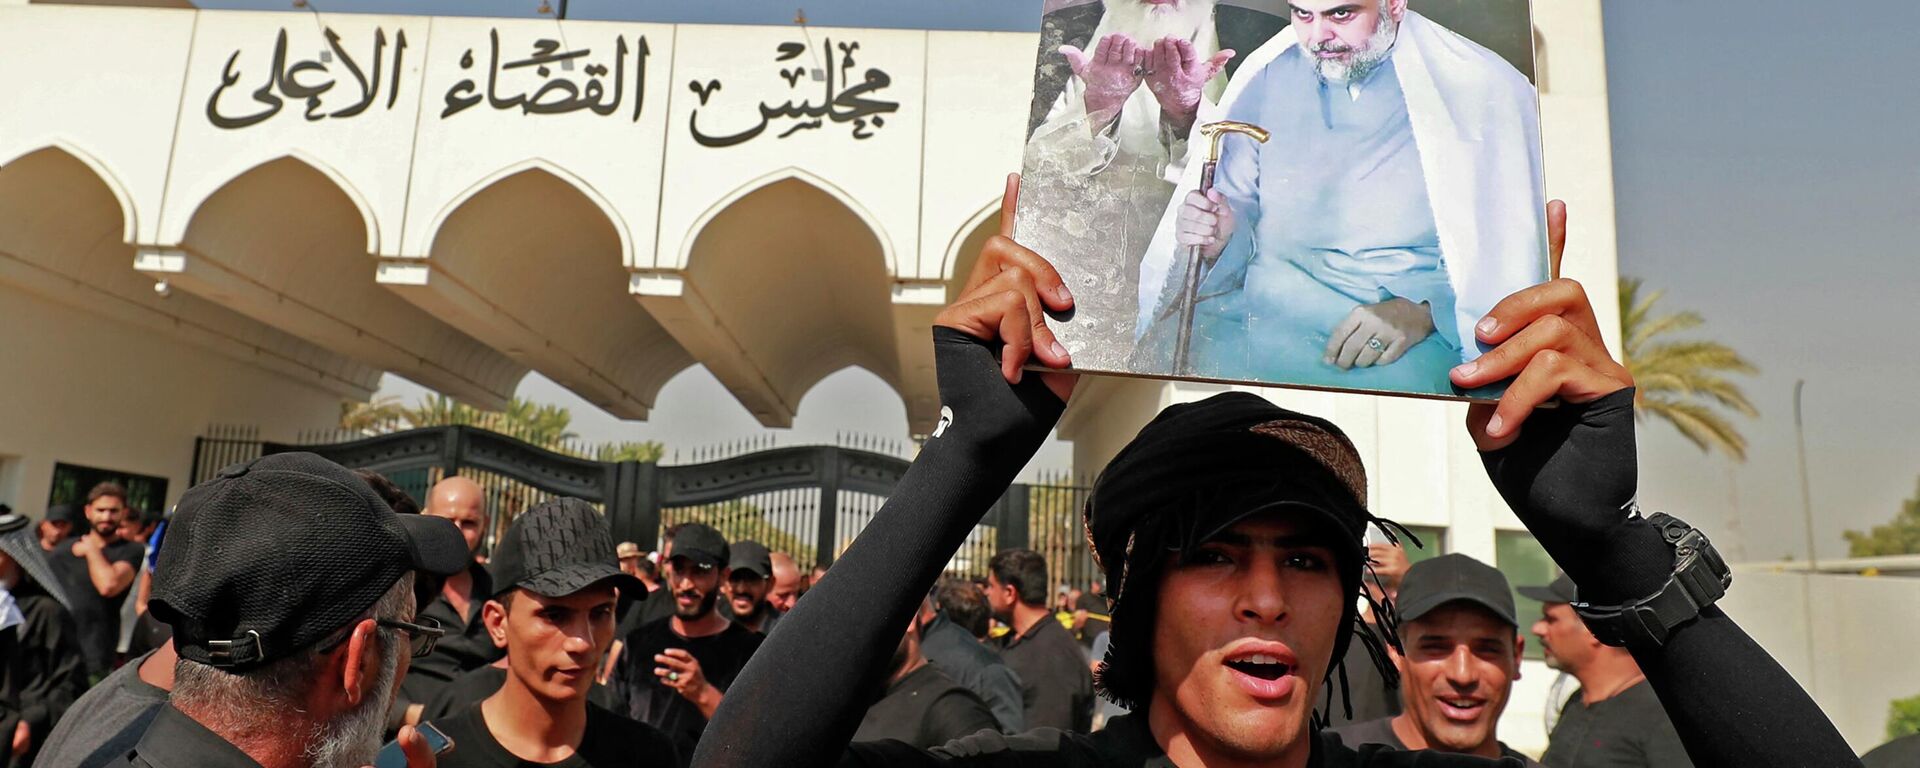 A man lifts a placard depicting Iraqi Shiite cleric Muqtada al-Sadr (R) and upporters of Iraqi Shiite cleric Muqtada al-Sadr his late father Grand Ayatollah Mohammed Sadeq al-Sadr, as his supporters gather outside the headquarters of the Supreme Judicial Council, Iraq's highest judicial body, in the capital Baghdad, on August 23, 2022.  - Sputnik International, 1920, 23.08.2022